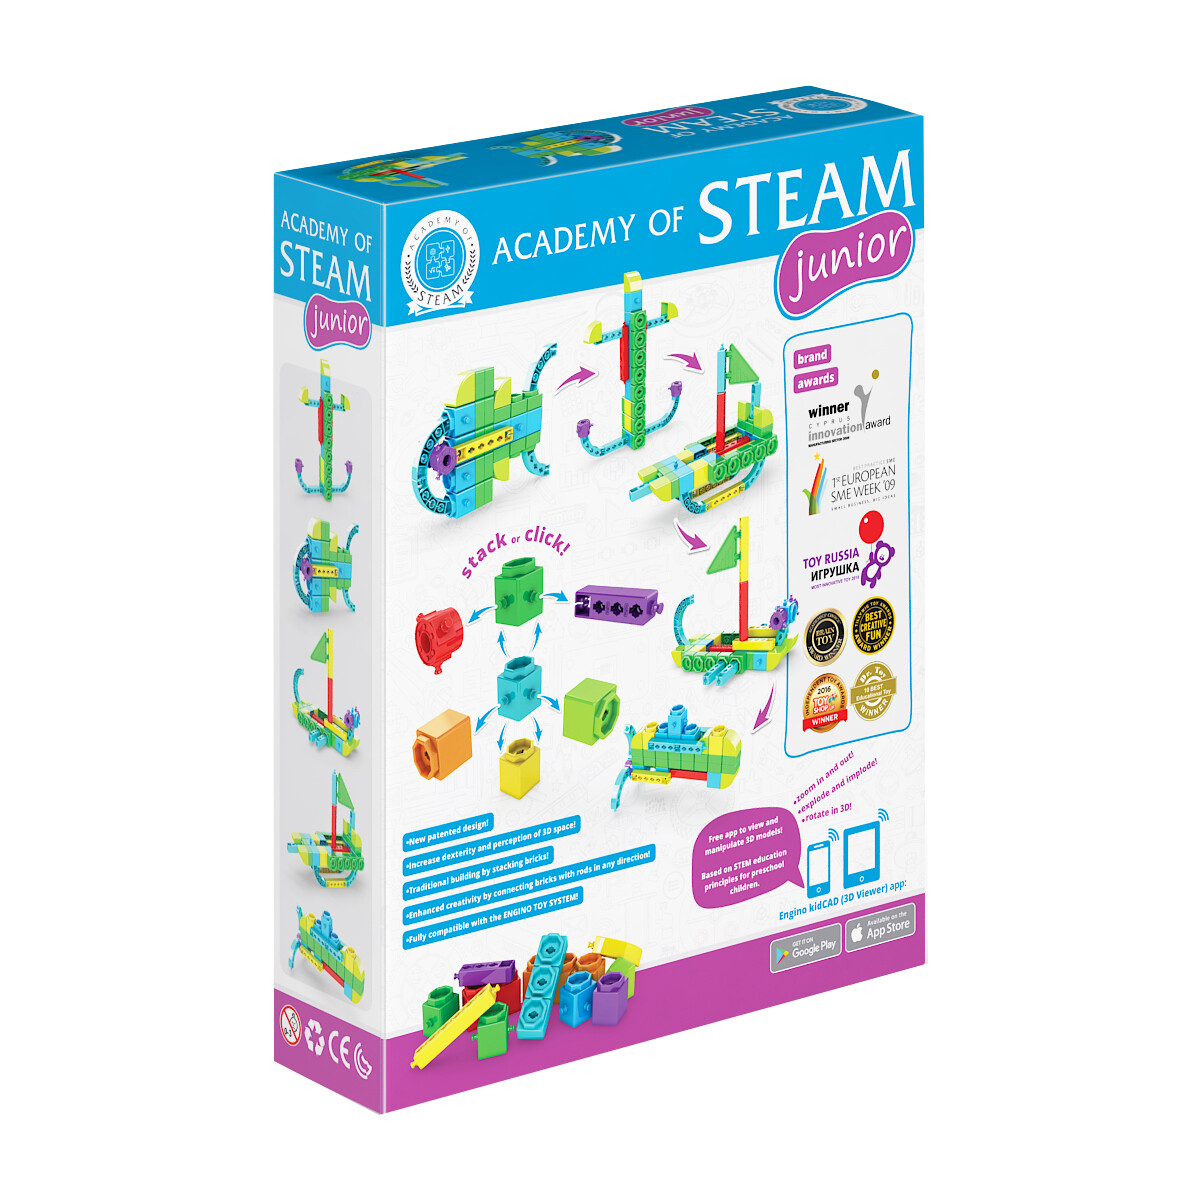 Engino Academy of STEAM Jnr - Qboidz Learning about Sea Adventures for ages 3 - 7